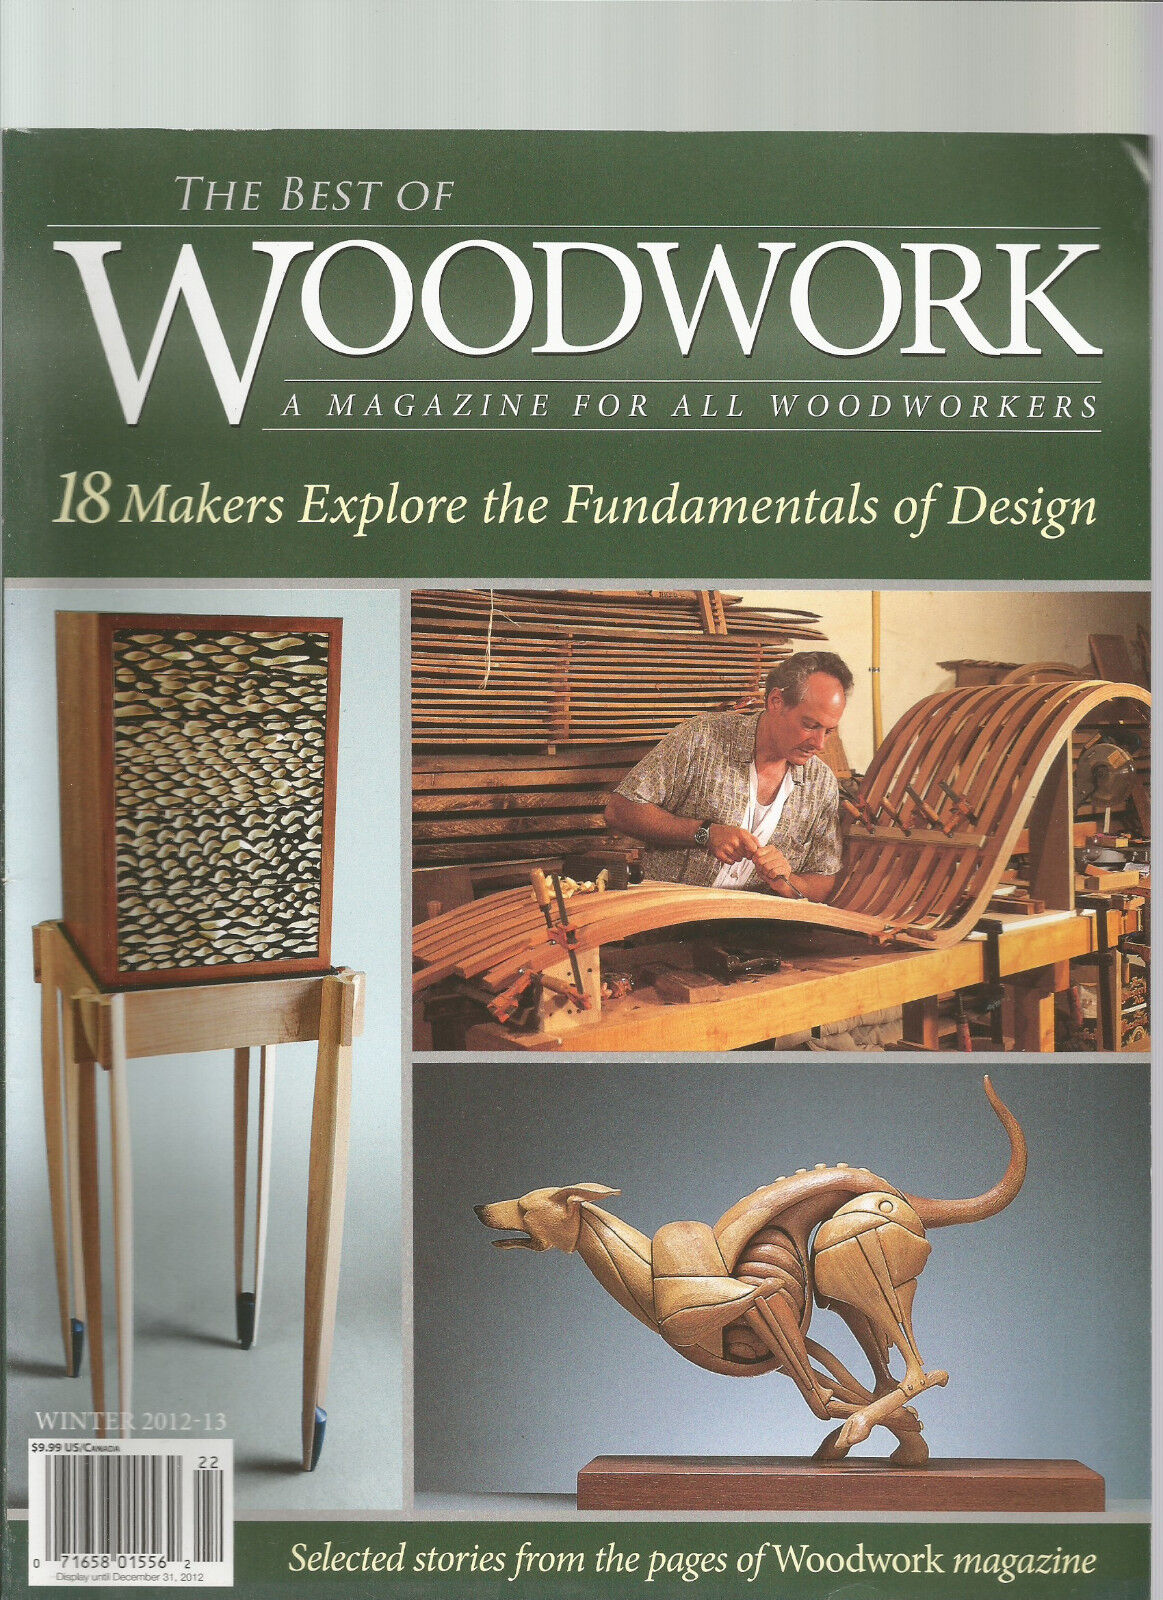 what is the best woodworking magazine? 2